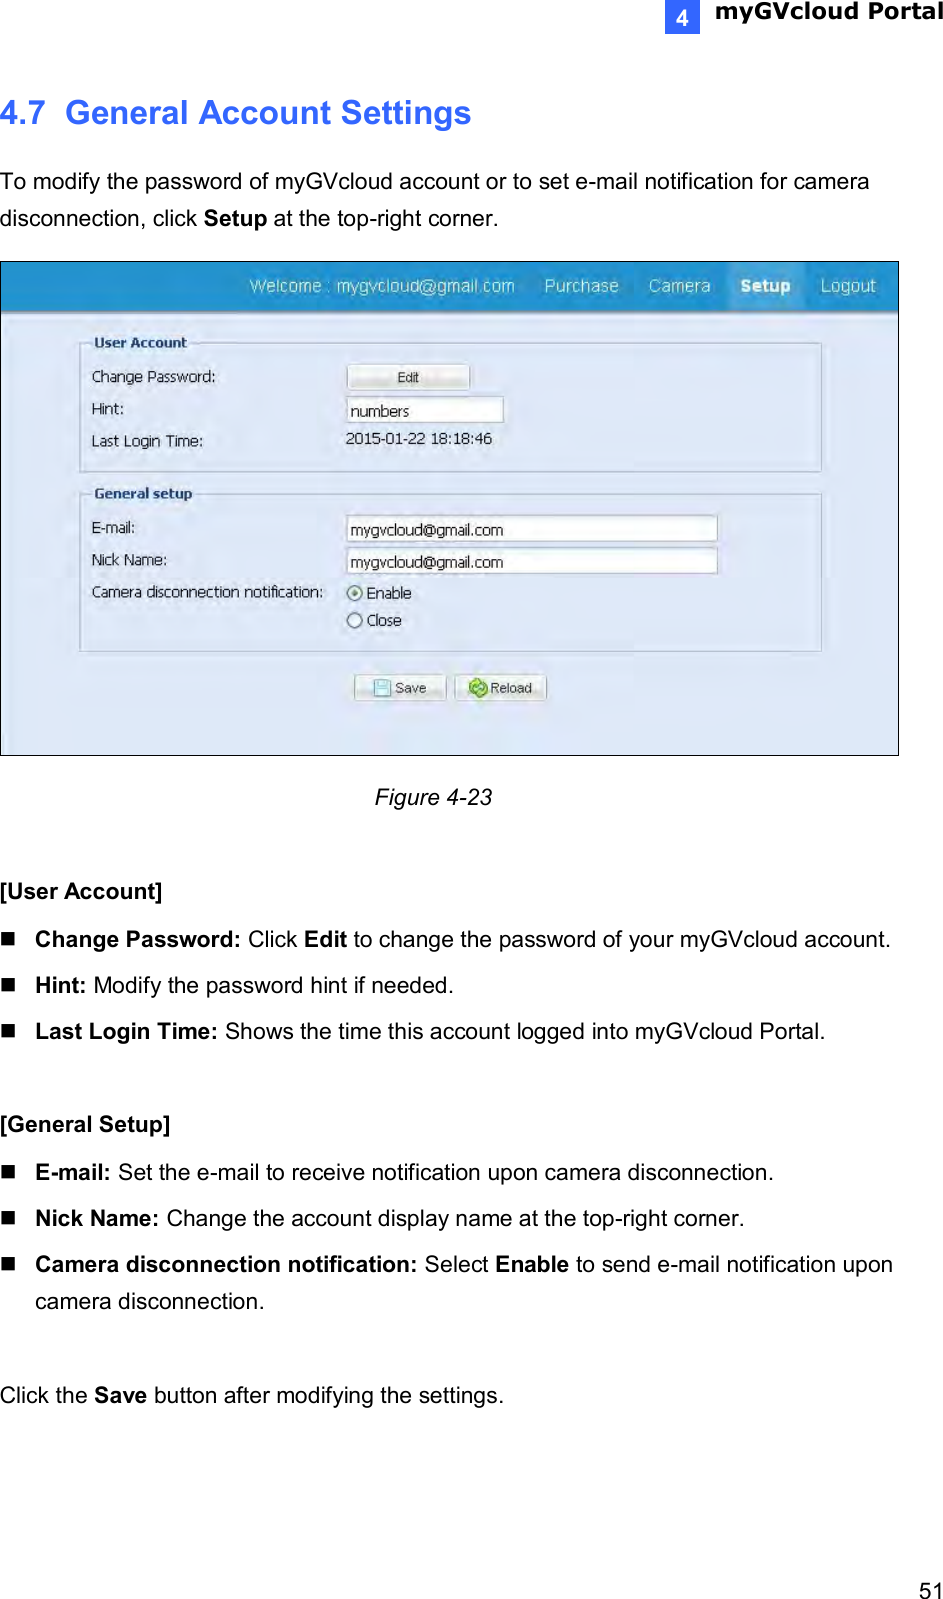  myGVcloud Portal    514 4.7  General Account Settings To modify the password of myGVcloud account or to set e-mail notification for camera disconnection, click Setup at the top-right corner.         Figure 4-23  [User Account]  Change Password: Click Edit to change the password of your myGVcloud account.   Hint: Modify the password hint if needed.    Last Login Time: Shows the time this account logged into myGVcloud Portal.  [General Setup]  E-mail: Set the e-mail to receive notification upon camera disconnection.  Nick Name: Change the account display name at the top-right corner.   Camera disconnection notification: Select Enable to send e-mail notification upon camera disconnection.   Click the Save button after modifying the settings.  